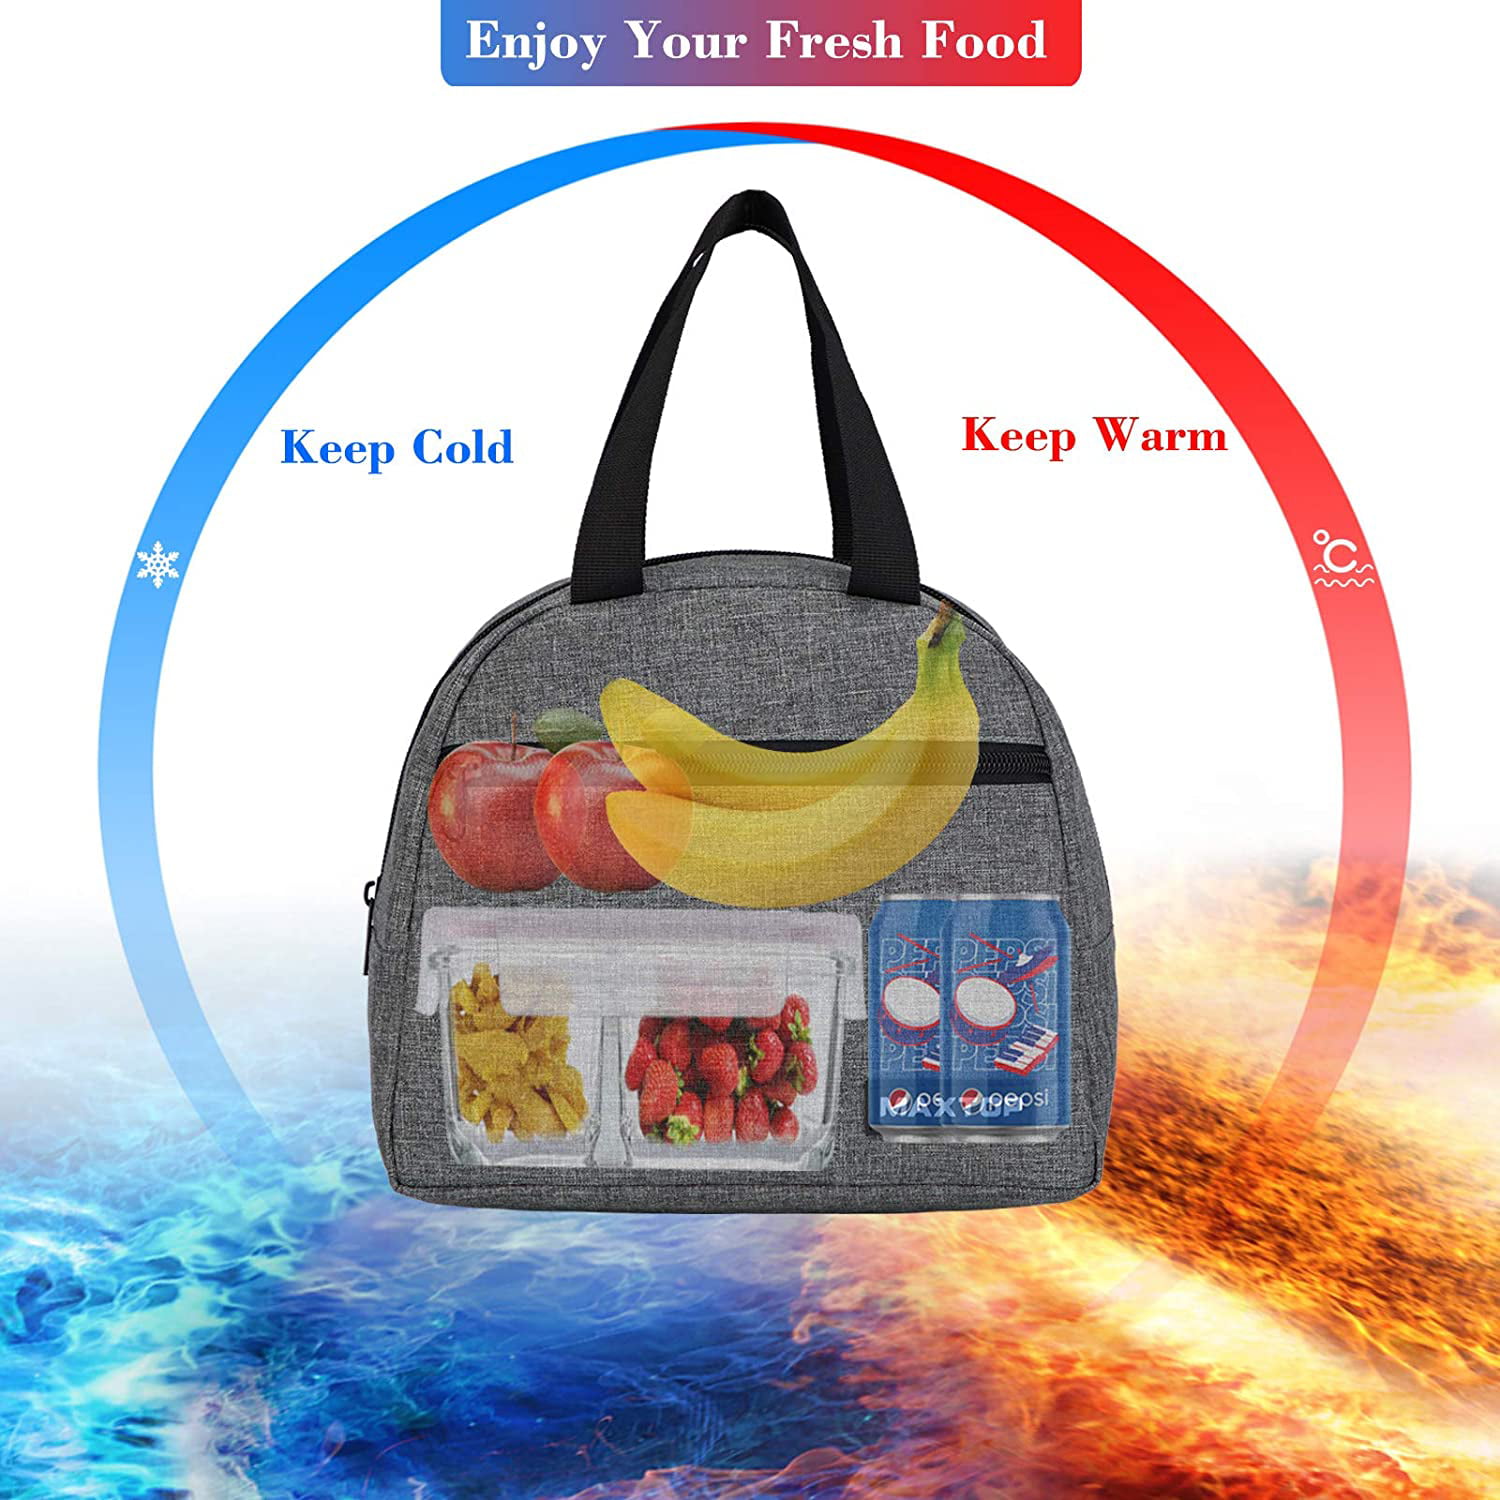 Cooler Tote Bag Gifts for Adults Women Men Work College Picnic Beach Park School Blue Lunch Bags for Women,Insulated Thermal Lunch Box Bag for Men with Front Pocket and Inner Mesh Pocket